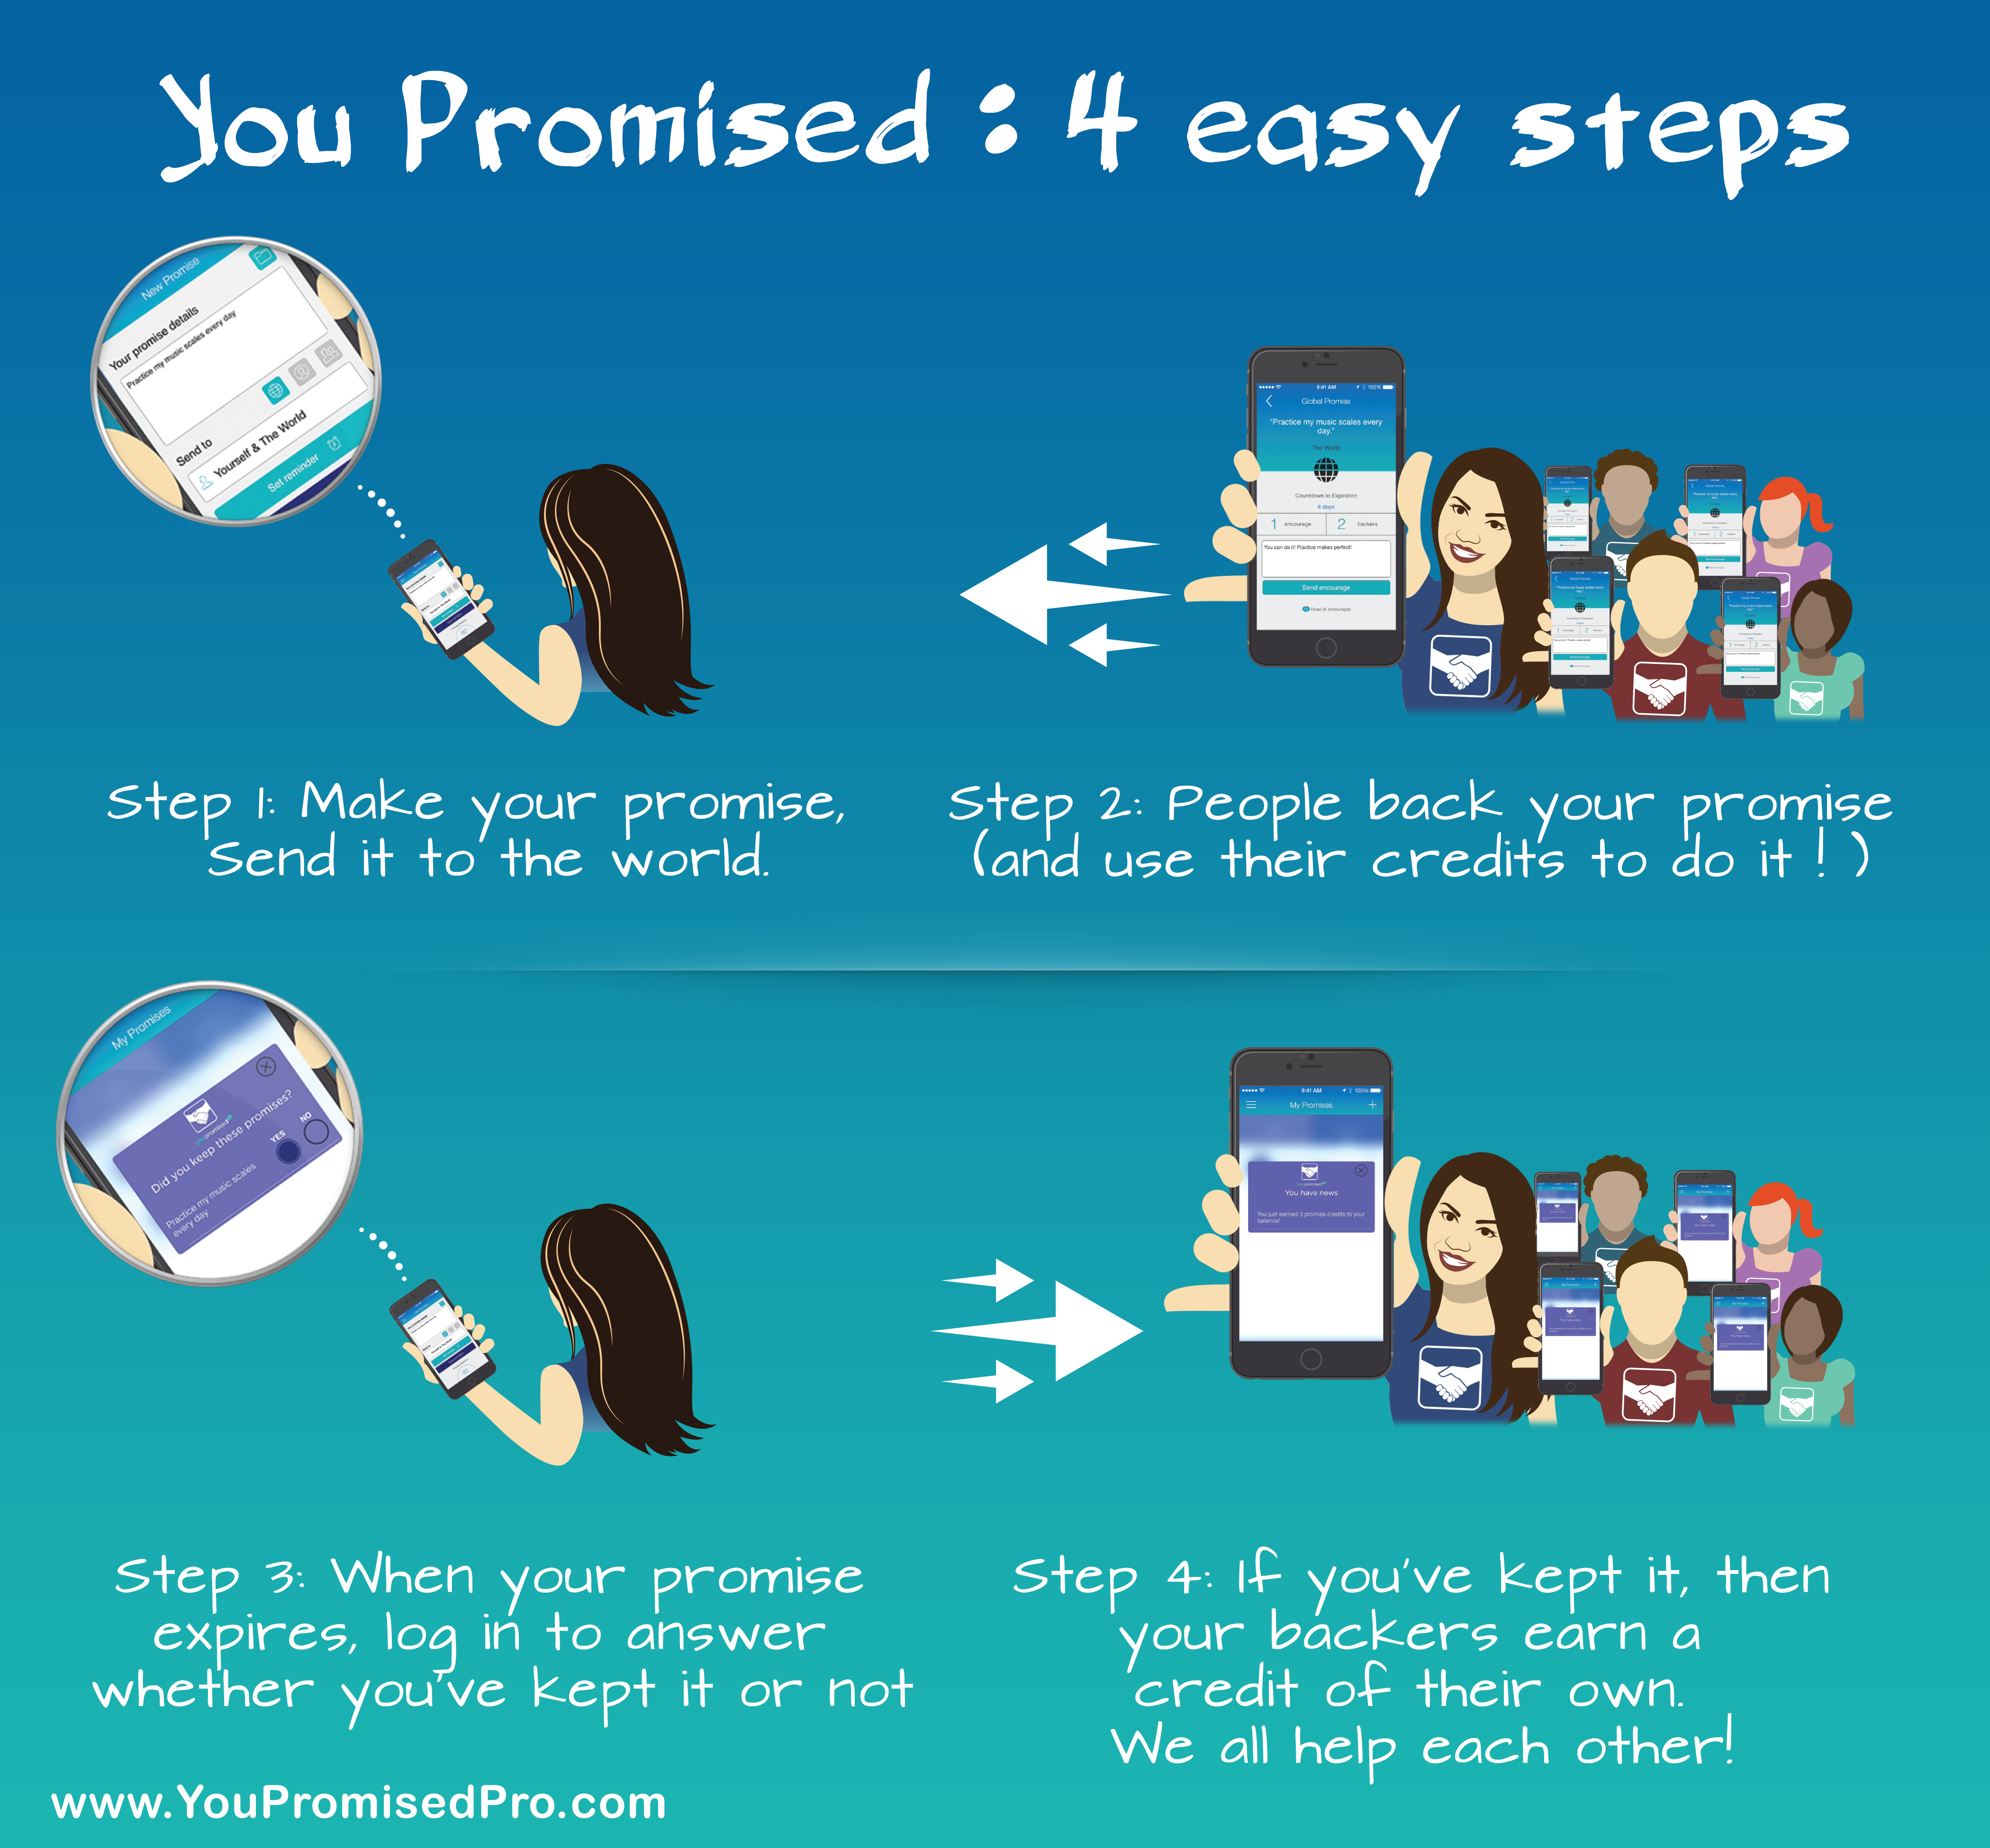 How it works - 4 easy steps.